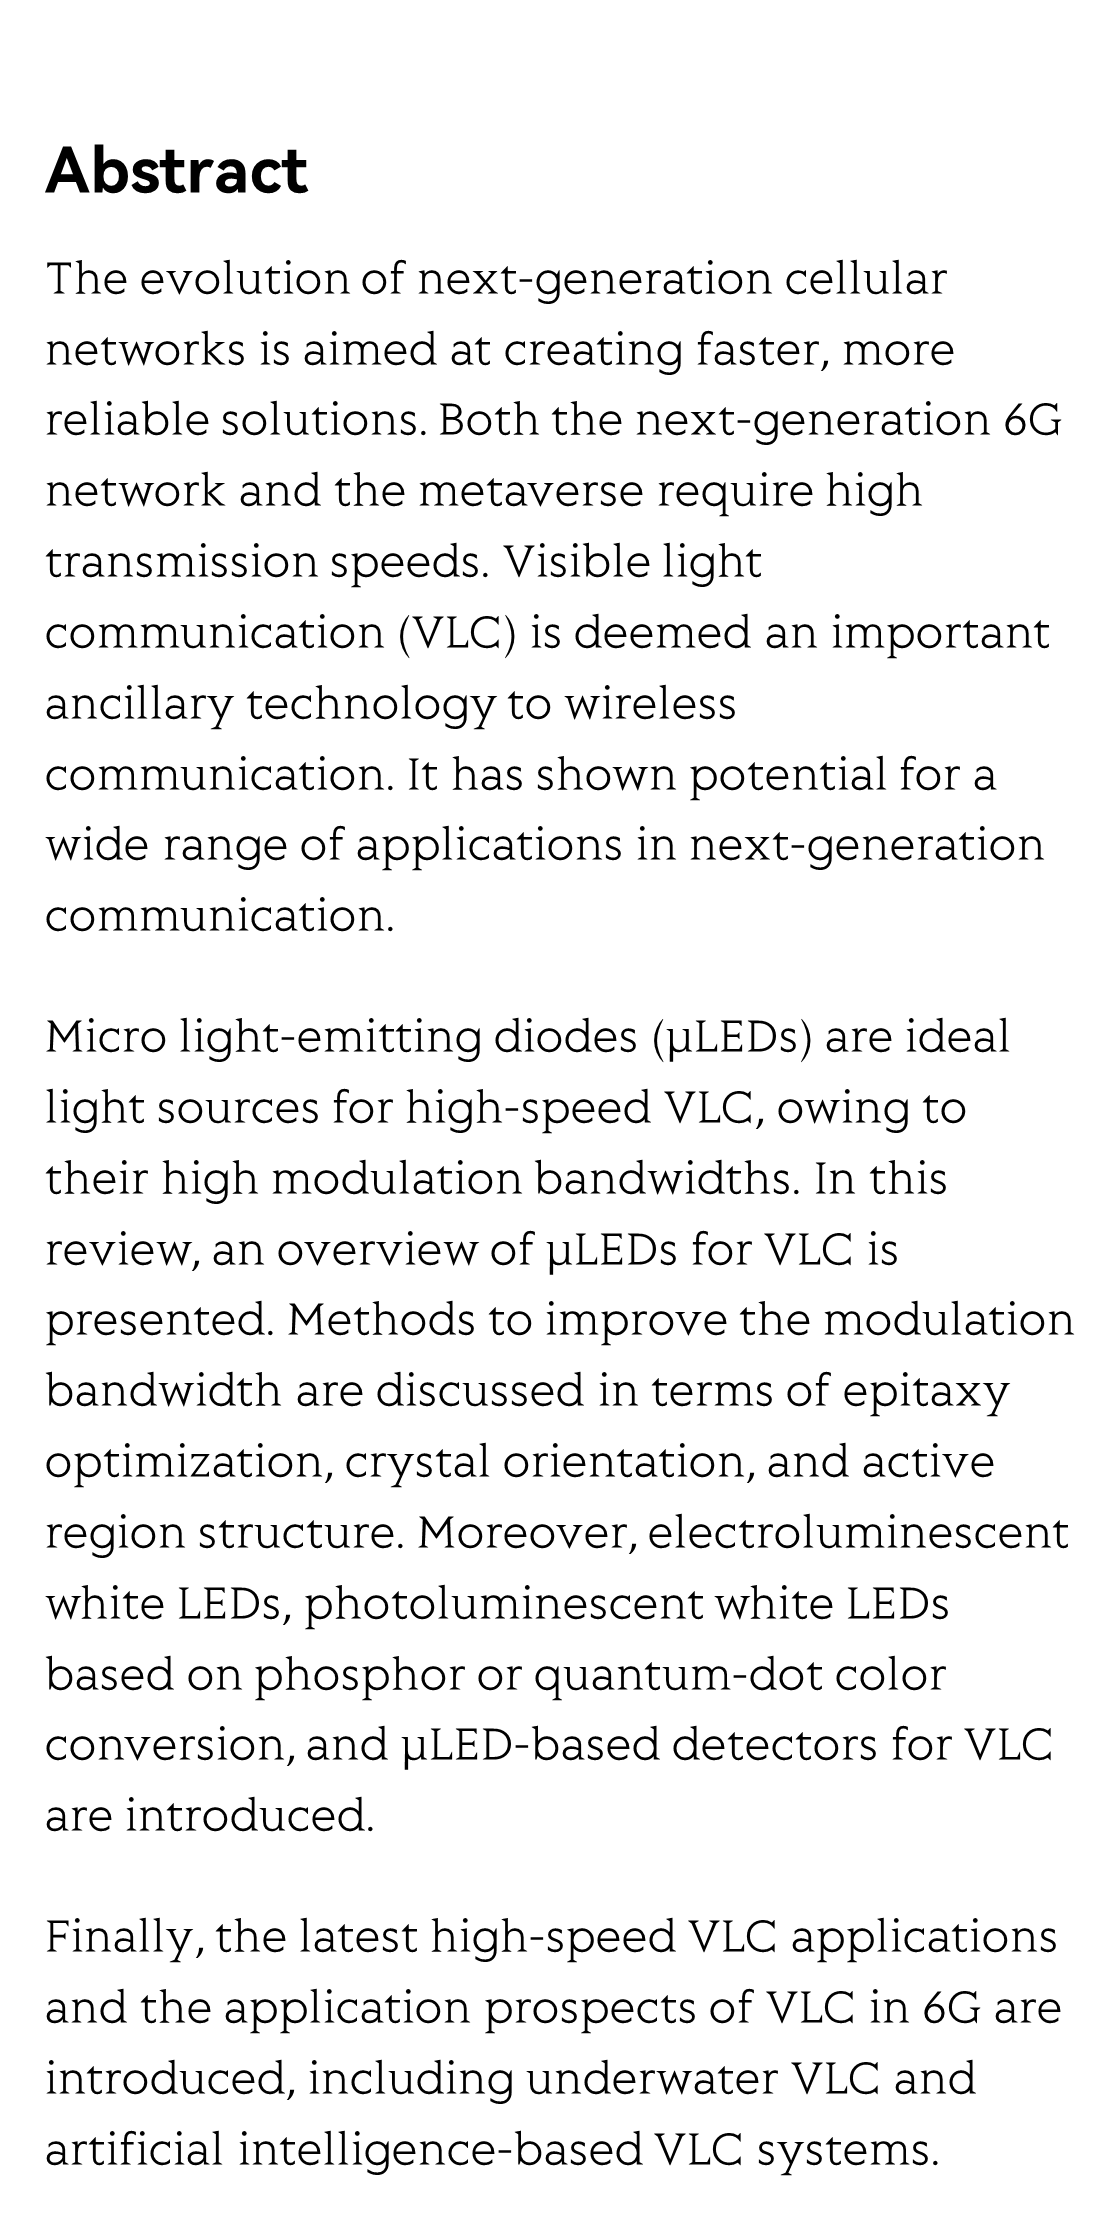 High-speed visible light communication based on micro-LED: A technology with wide applications in next generation communication_2